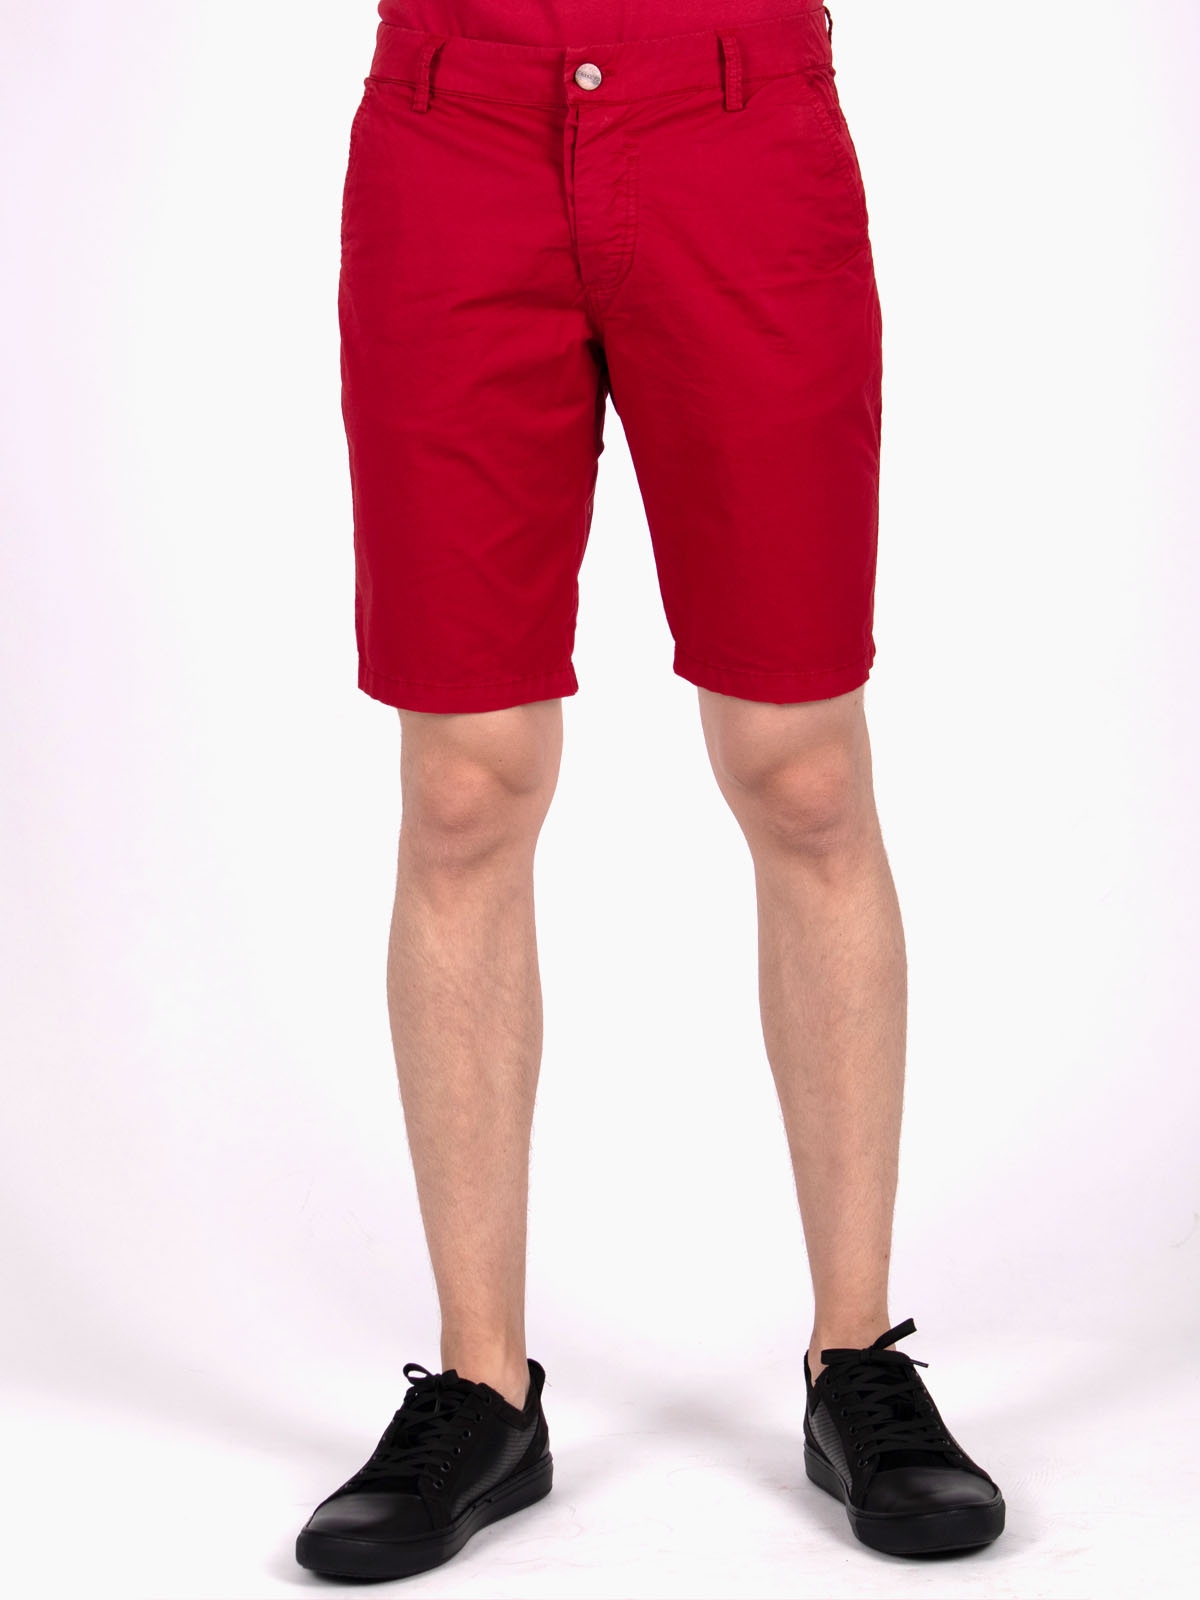  red shorts  - 67062 € 27.00 img2